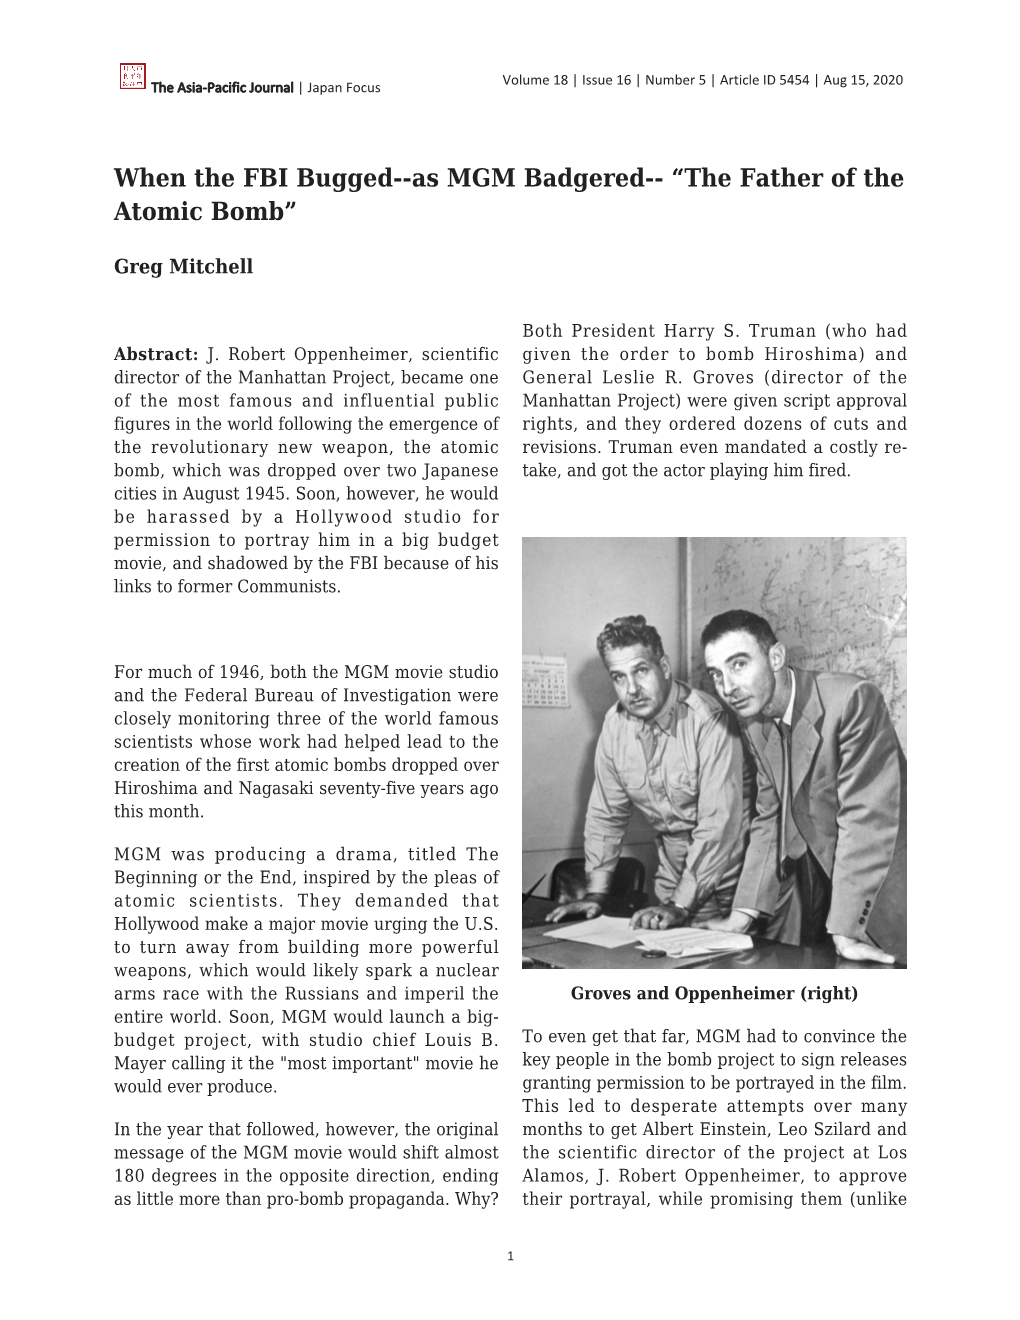 When the FBI Bugged--As MGM Badgered-- “The Father of the Atomic Bomb”